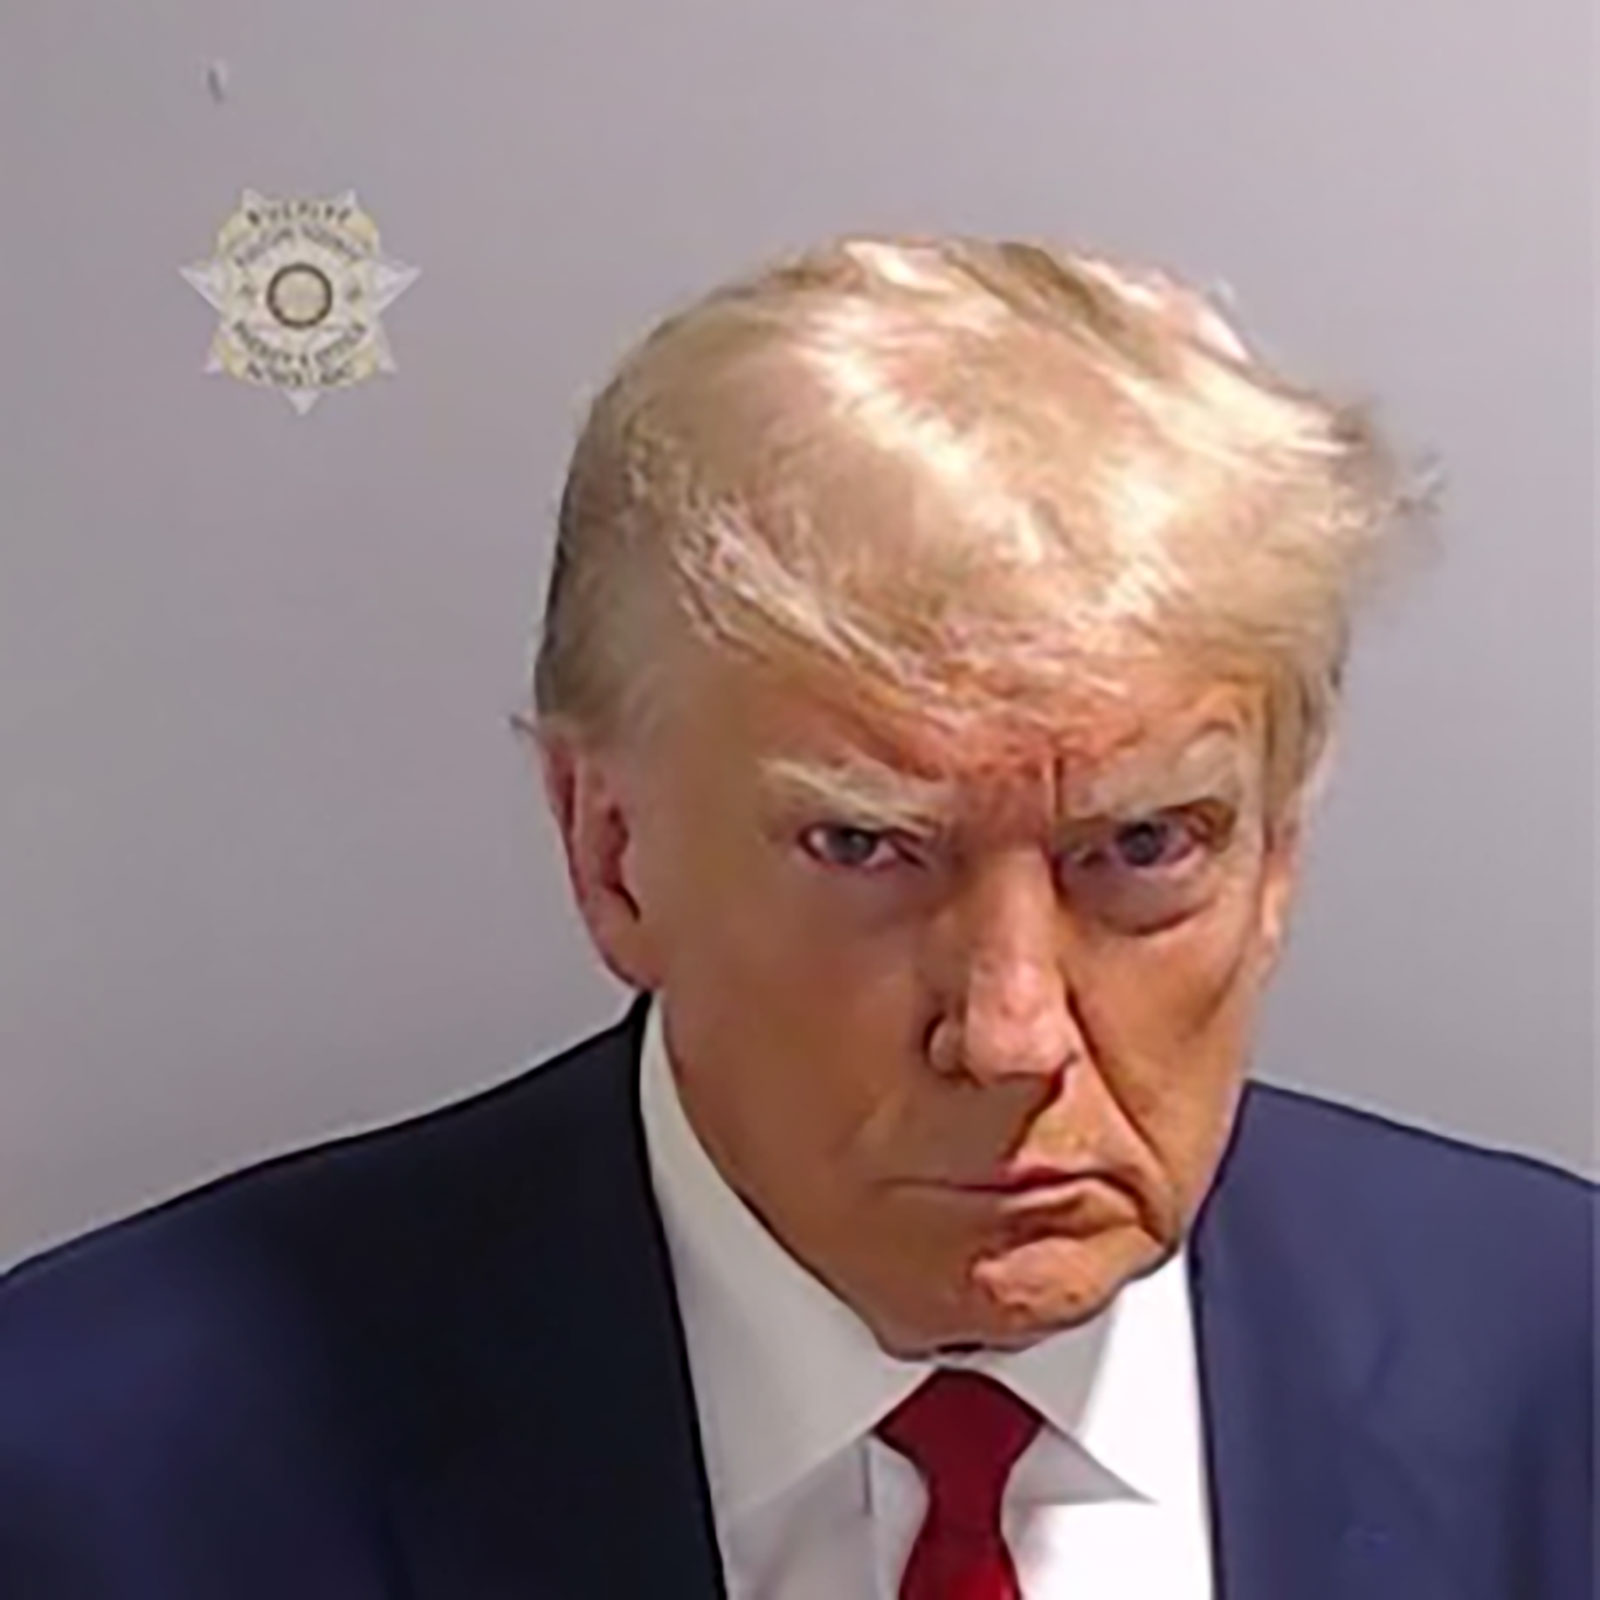 Former President Donald Trump's booking photo taken at the Fulton County Sheriff's Office on August 24. 